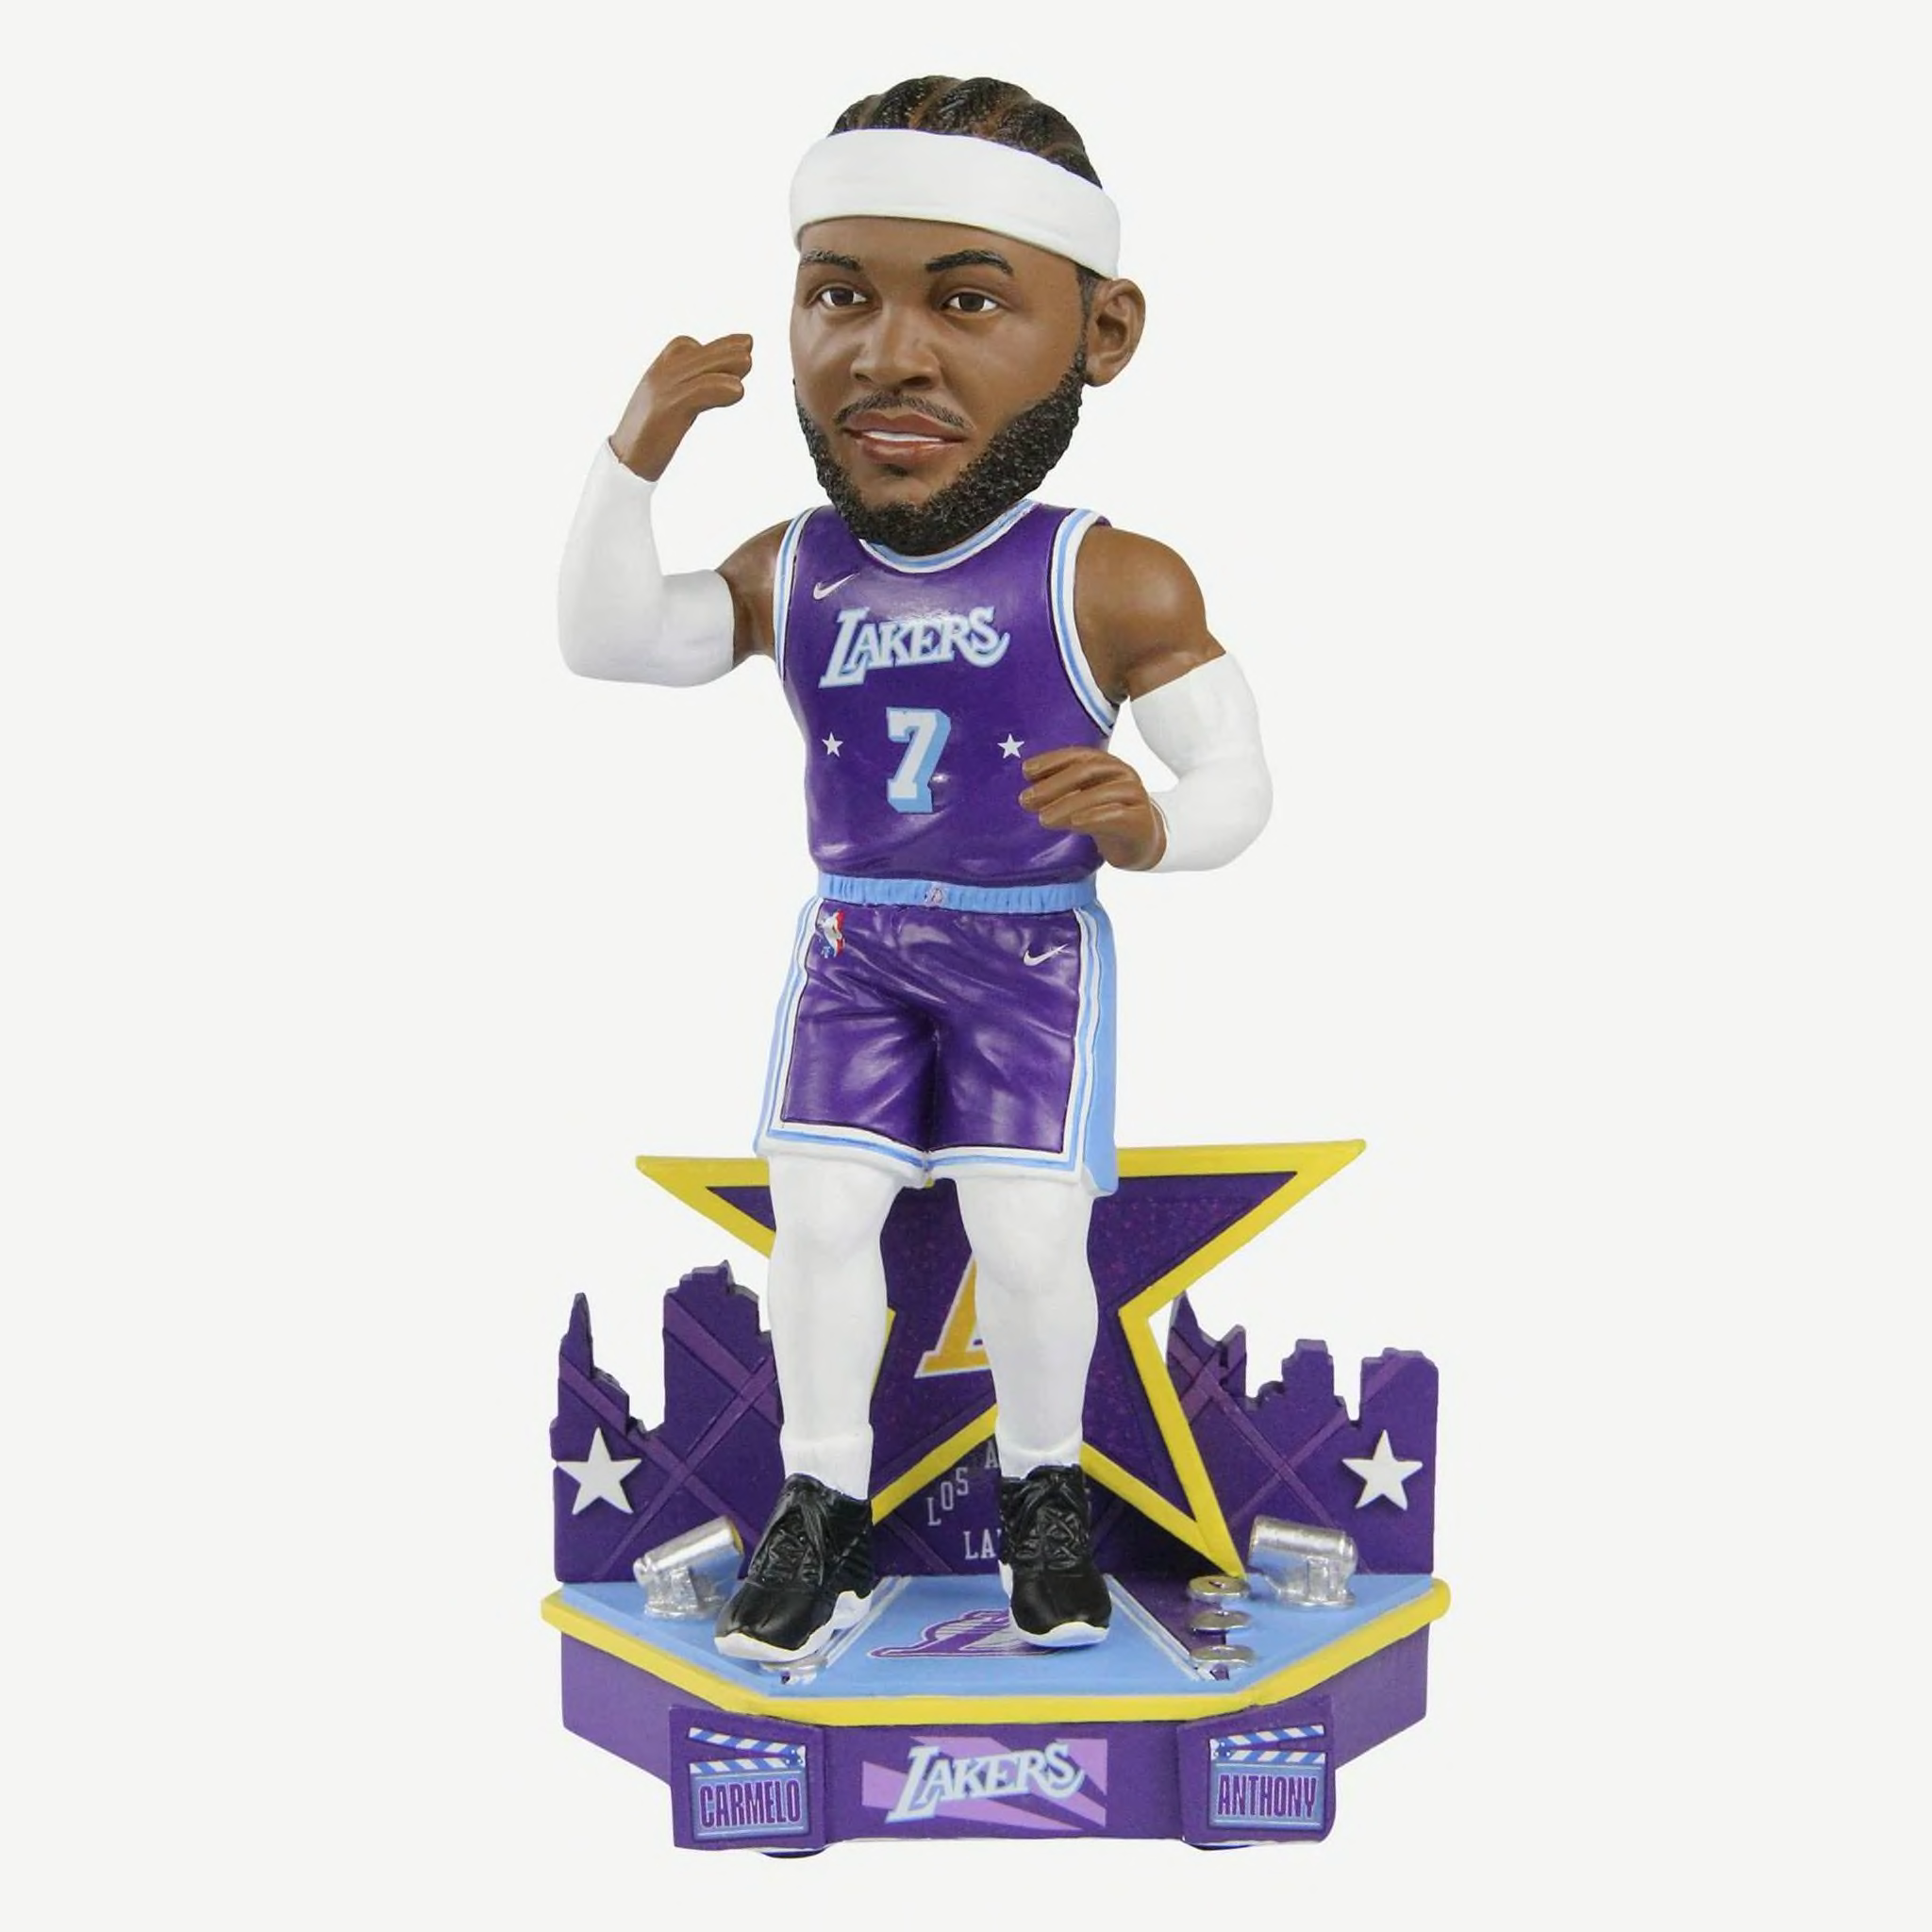 Limited-Edition LeBron James All-Star Game Bobblehead Available